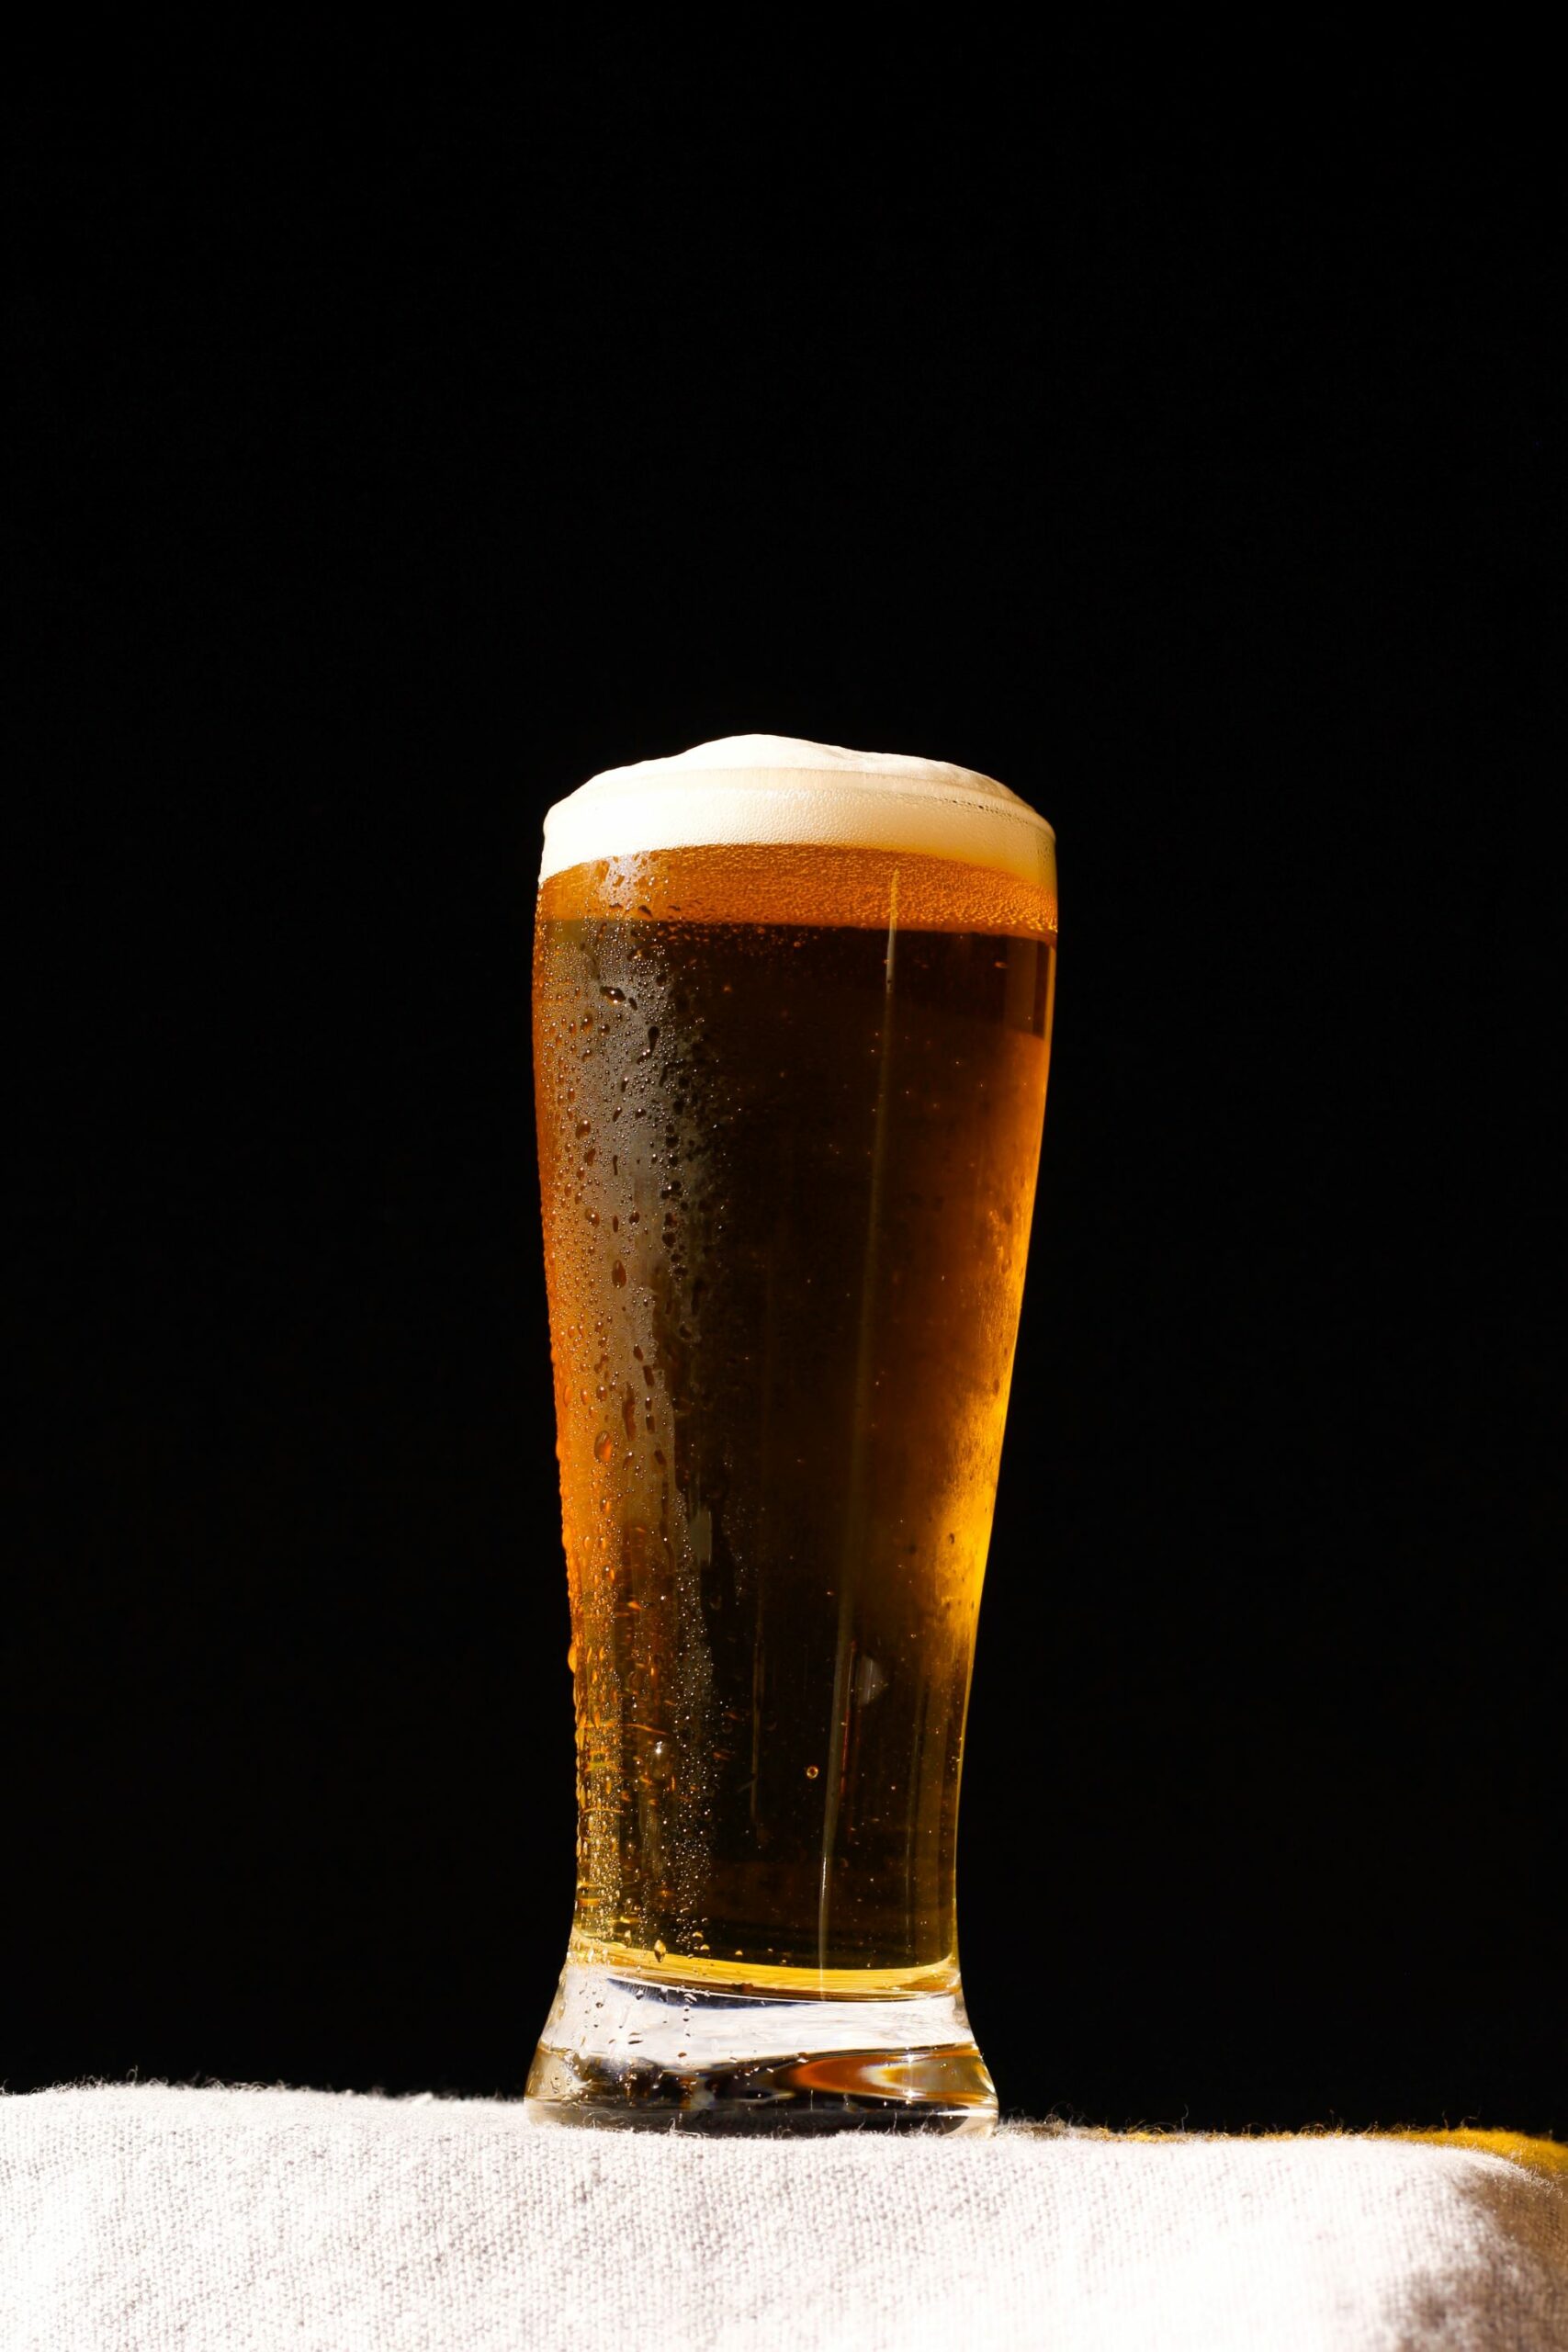 An image of a glass of craft beer.